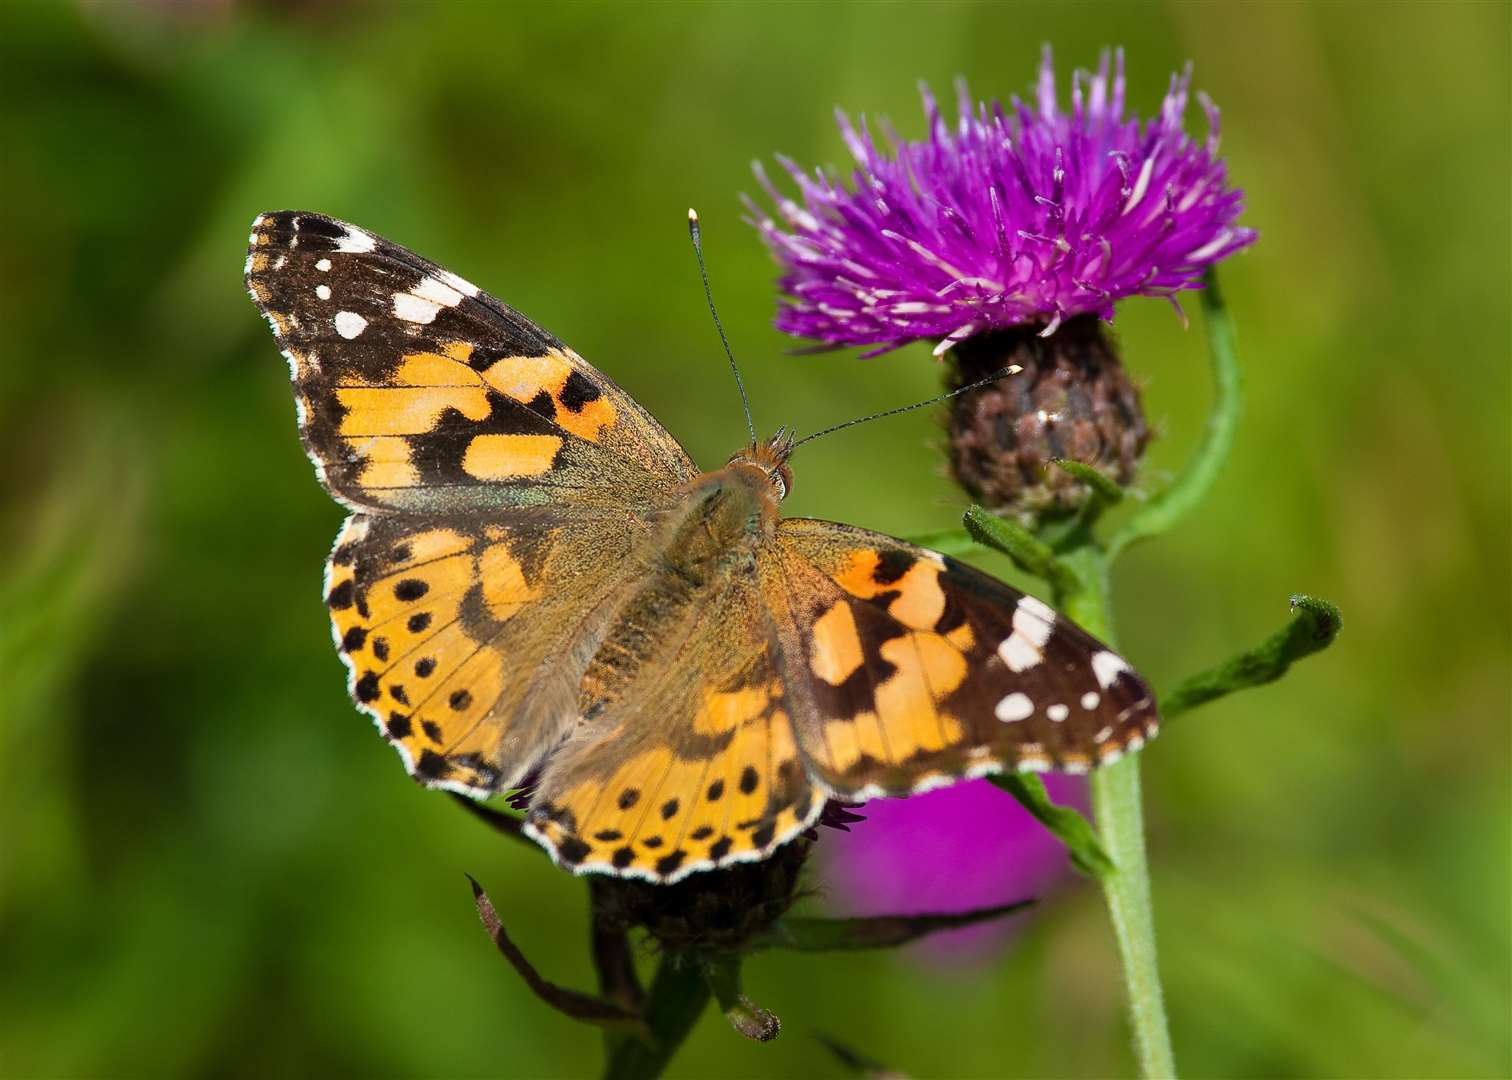 More than half of Britain's butterfly species are in trouble